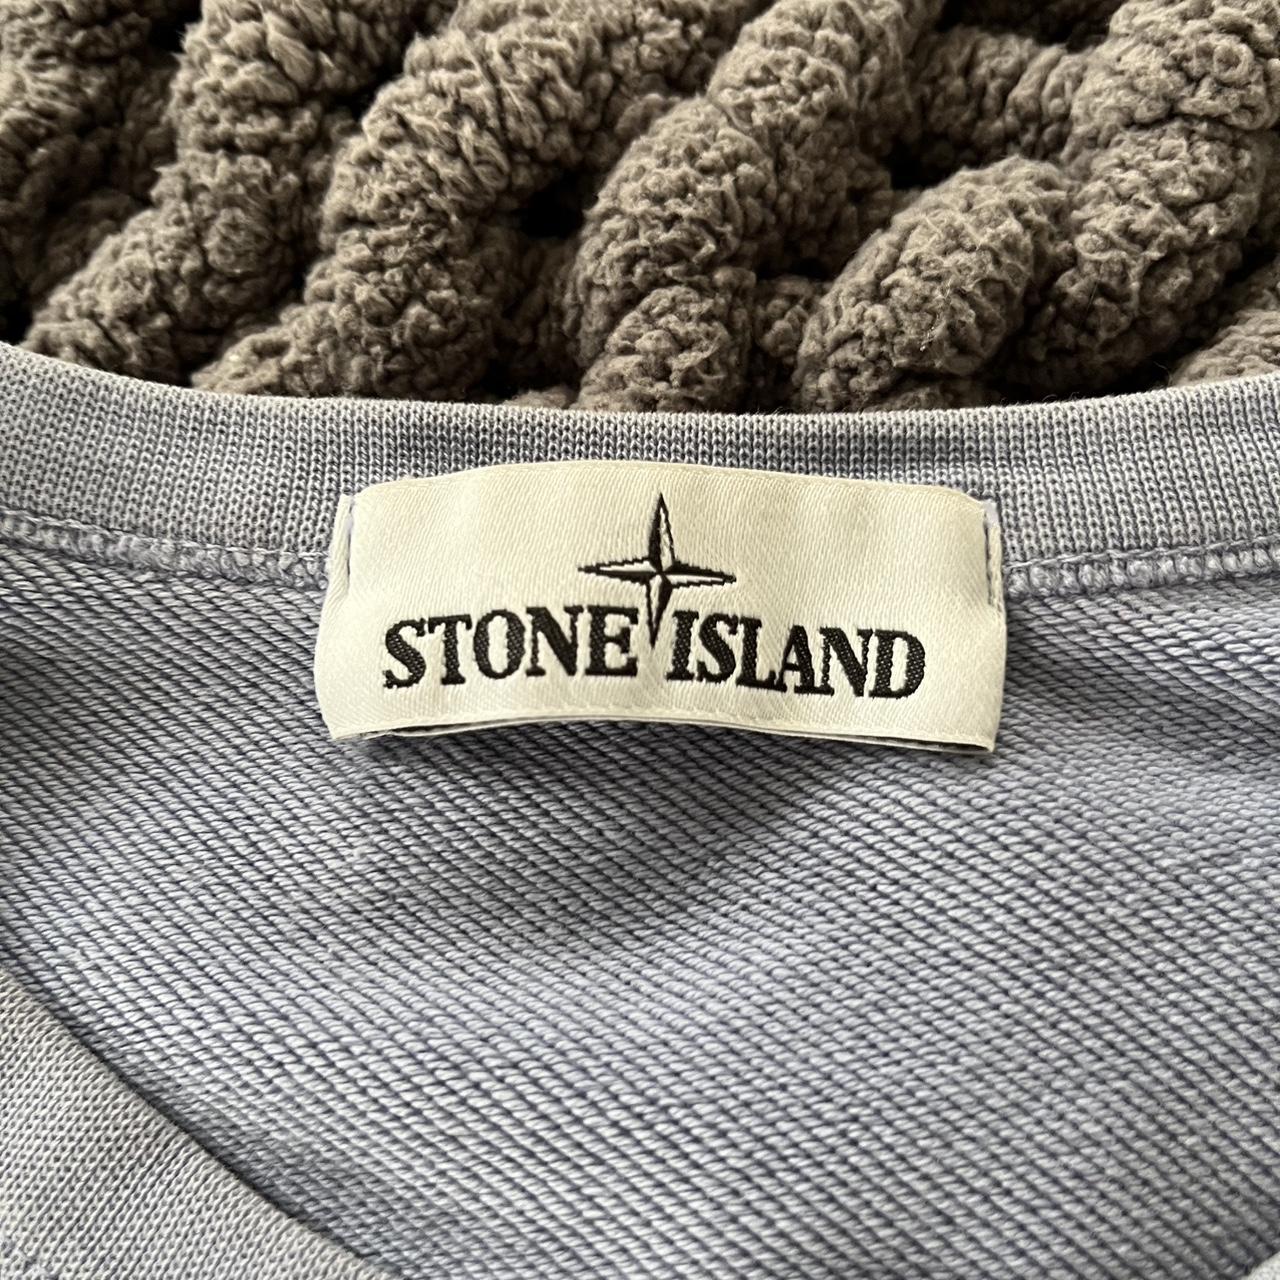 Stone Island jumper small stain- pictured selling... - Depop